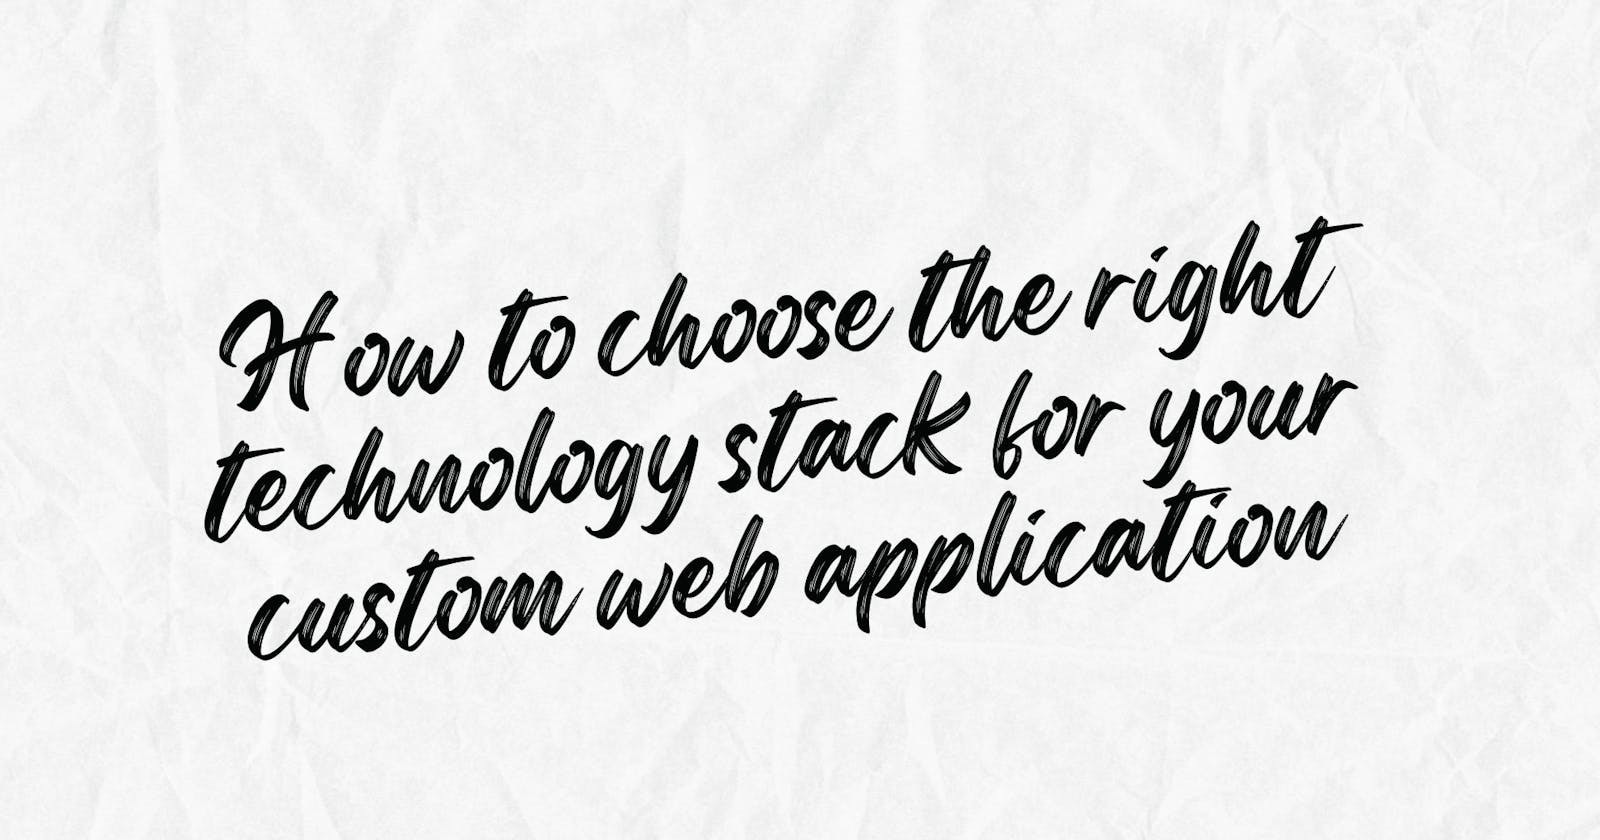 How to choose the right technology stack for your custom web application